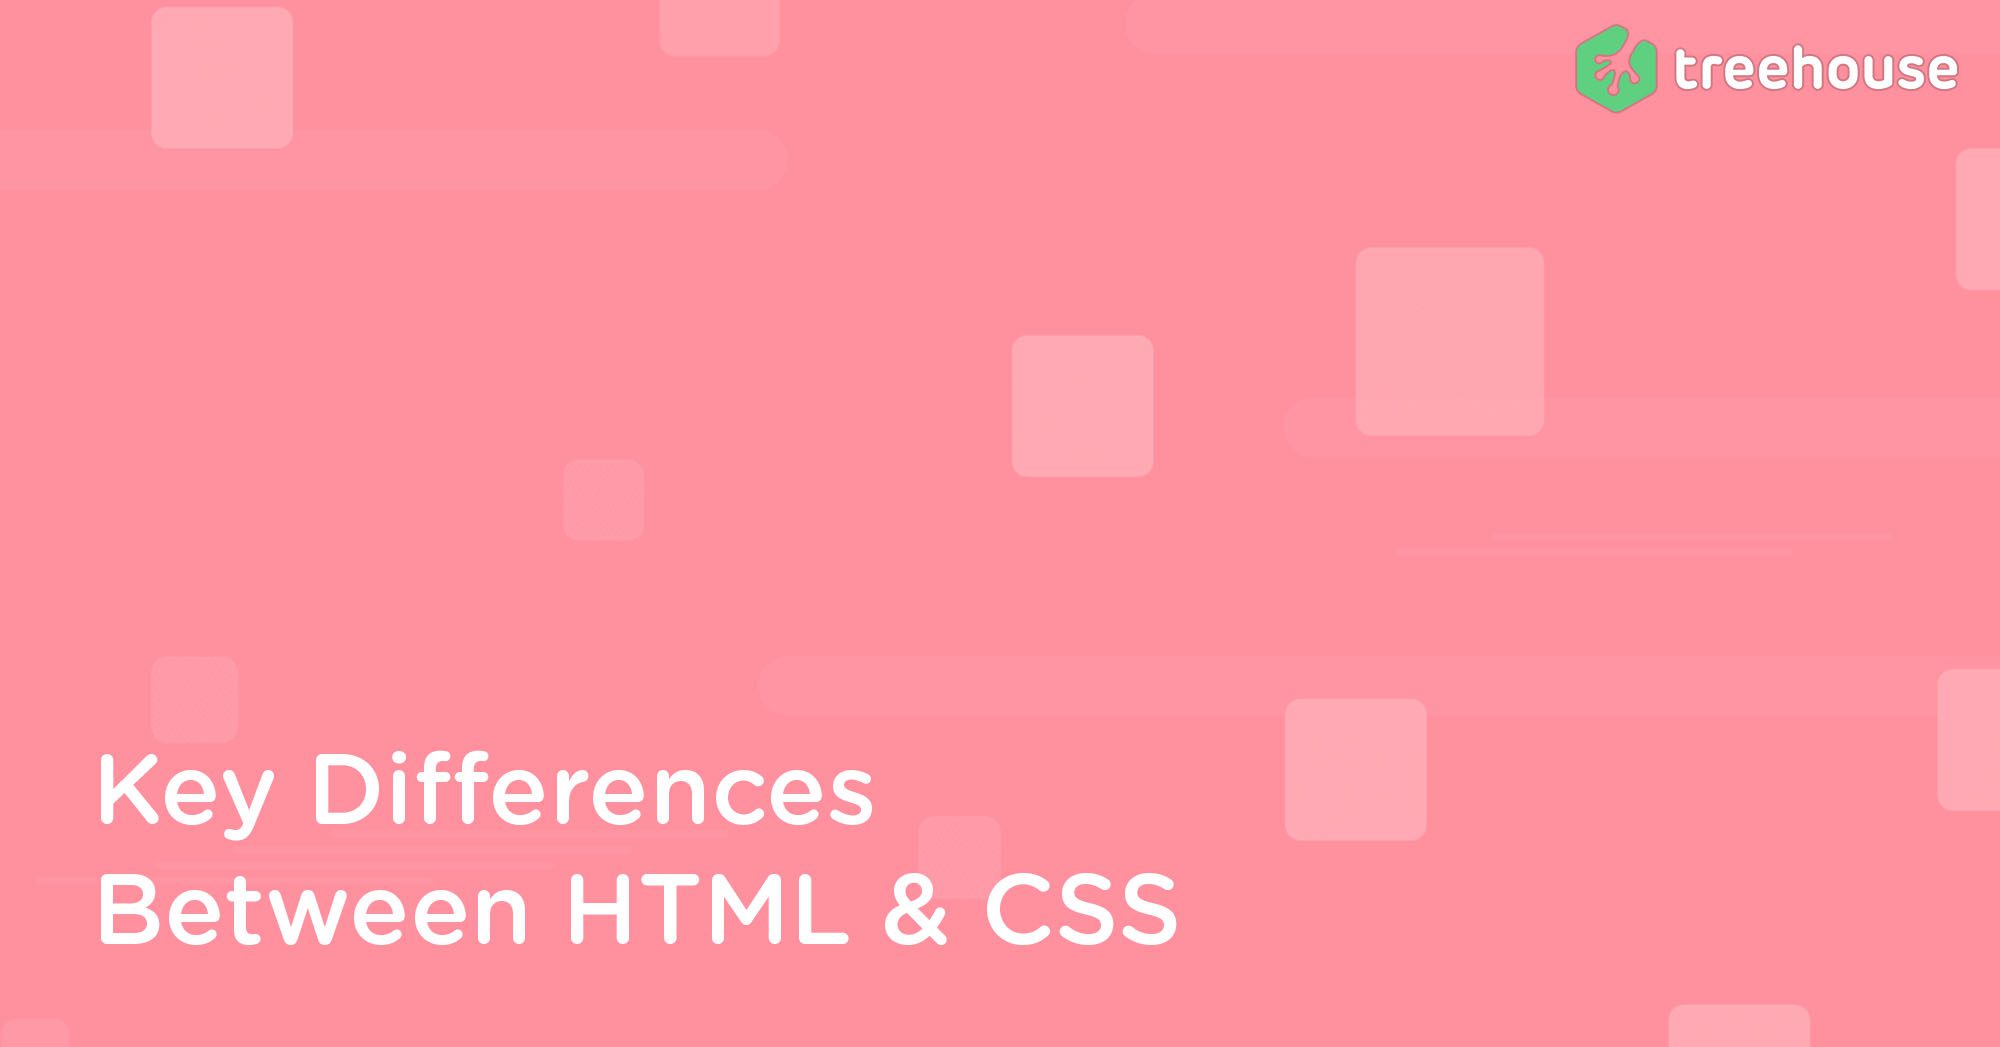 CSS vs. HTML: What's the Difference? | Treehouse Blog